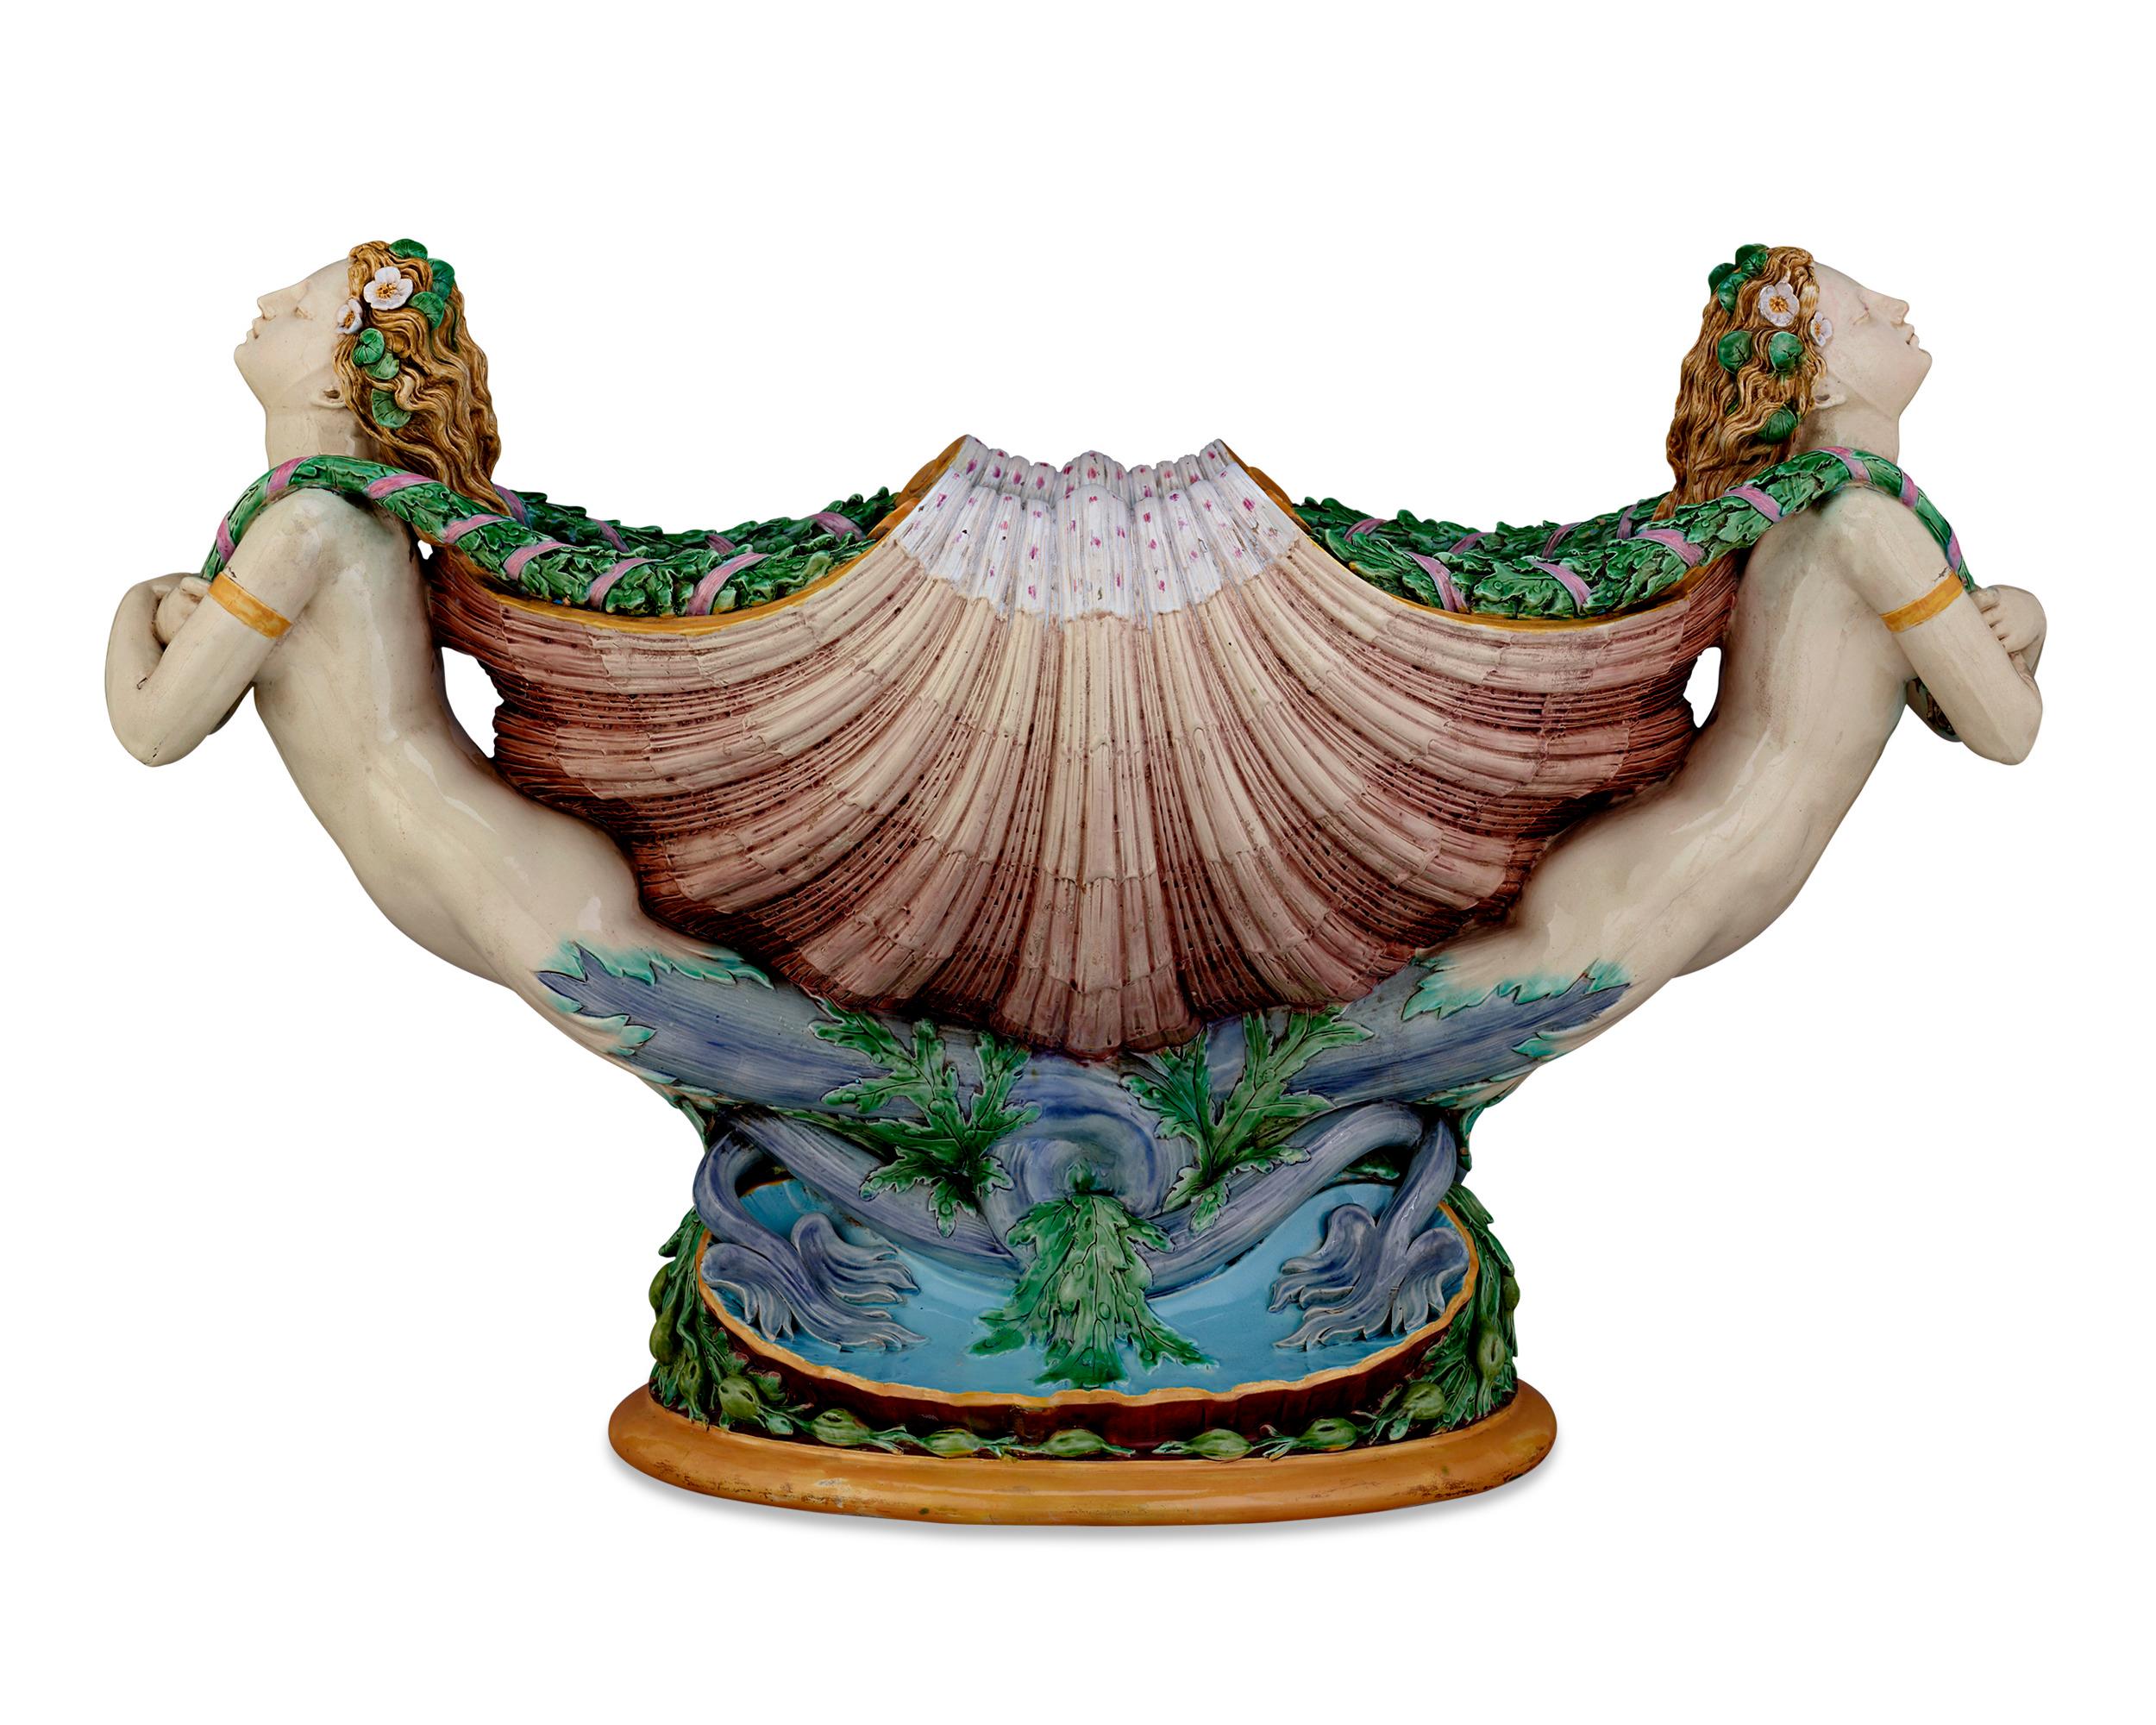 This monumental majolica jardinière by Minton represents the artistic heights of this highly important British firm. The design, which features two mermaids supporting a scallop shell, was used by Minton to represent their creations in majolica at